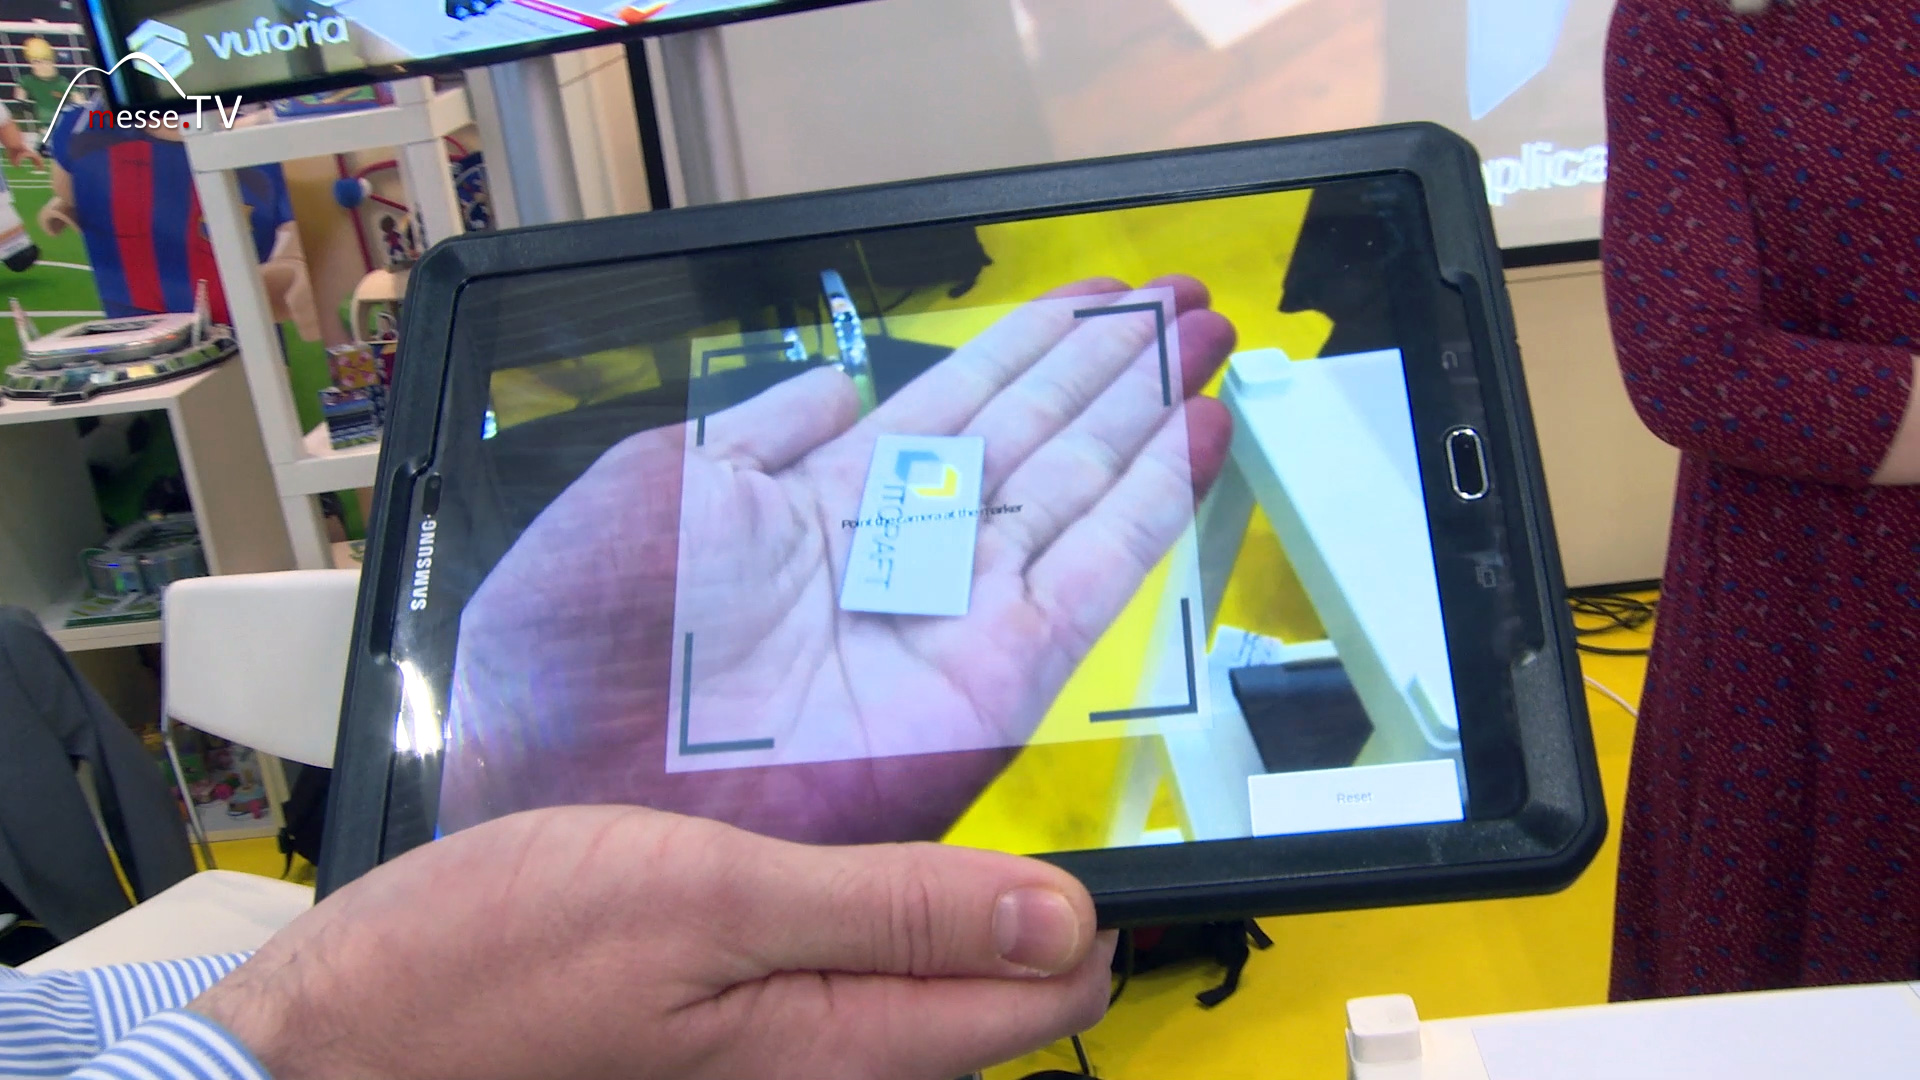 ITCraft Augmented Reality Spielwarenmesse